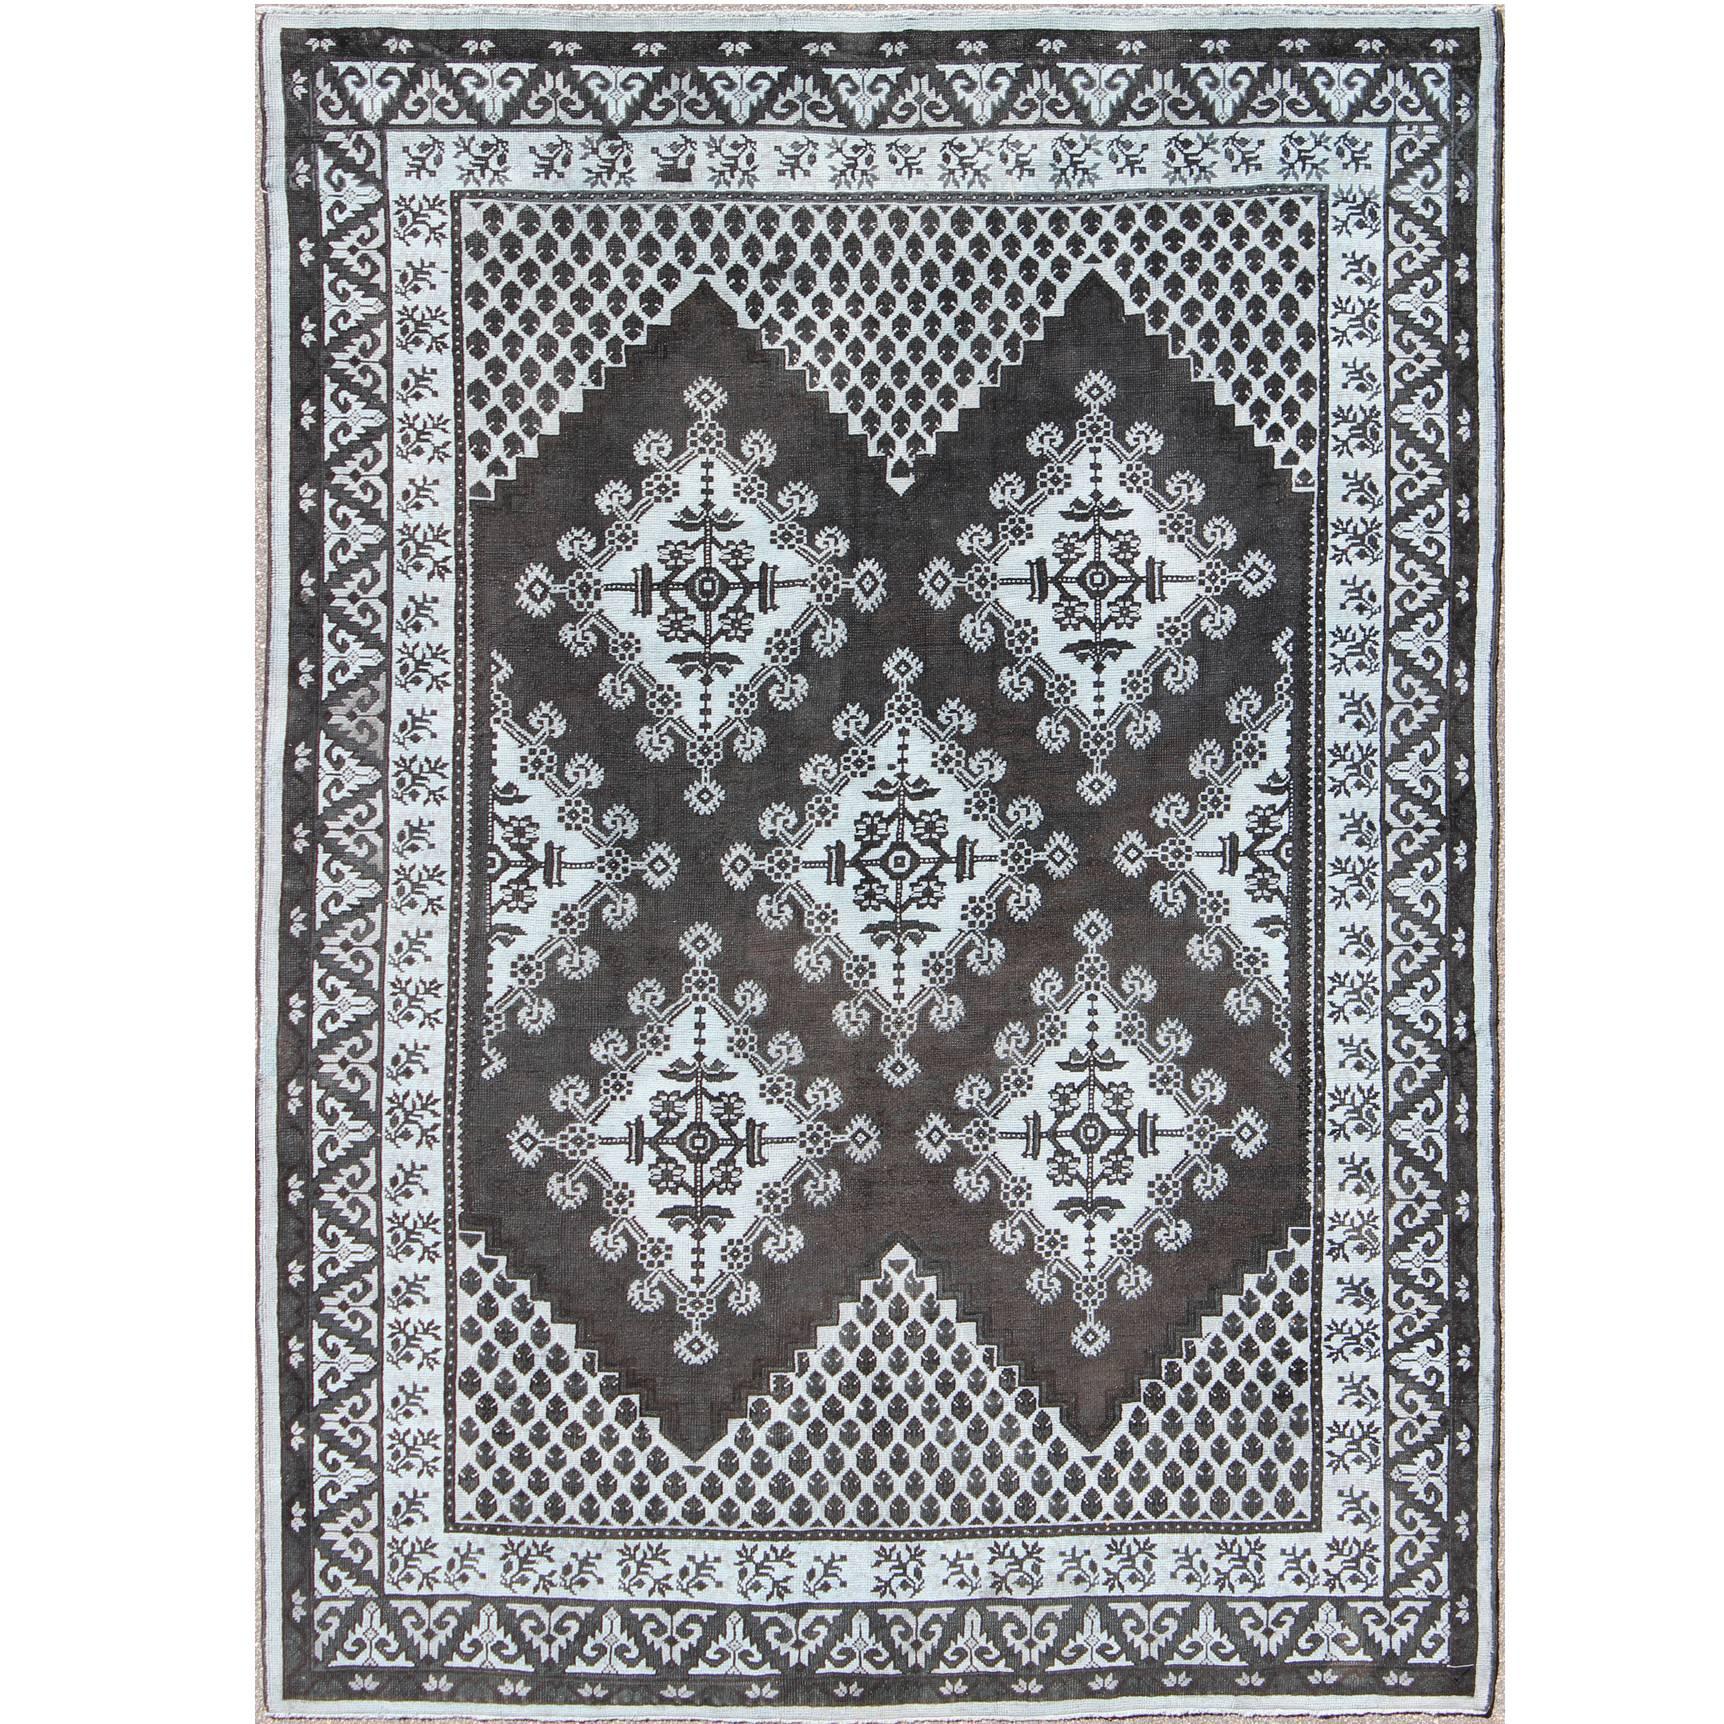 Geometric Design Vintage Tribal Moroccan Rug with Black and Gray For Sale